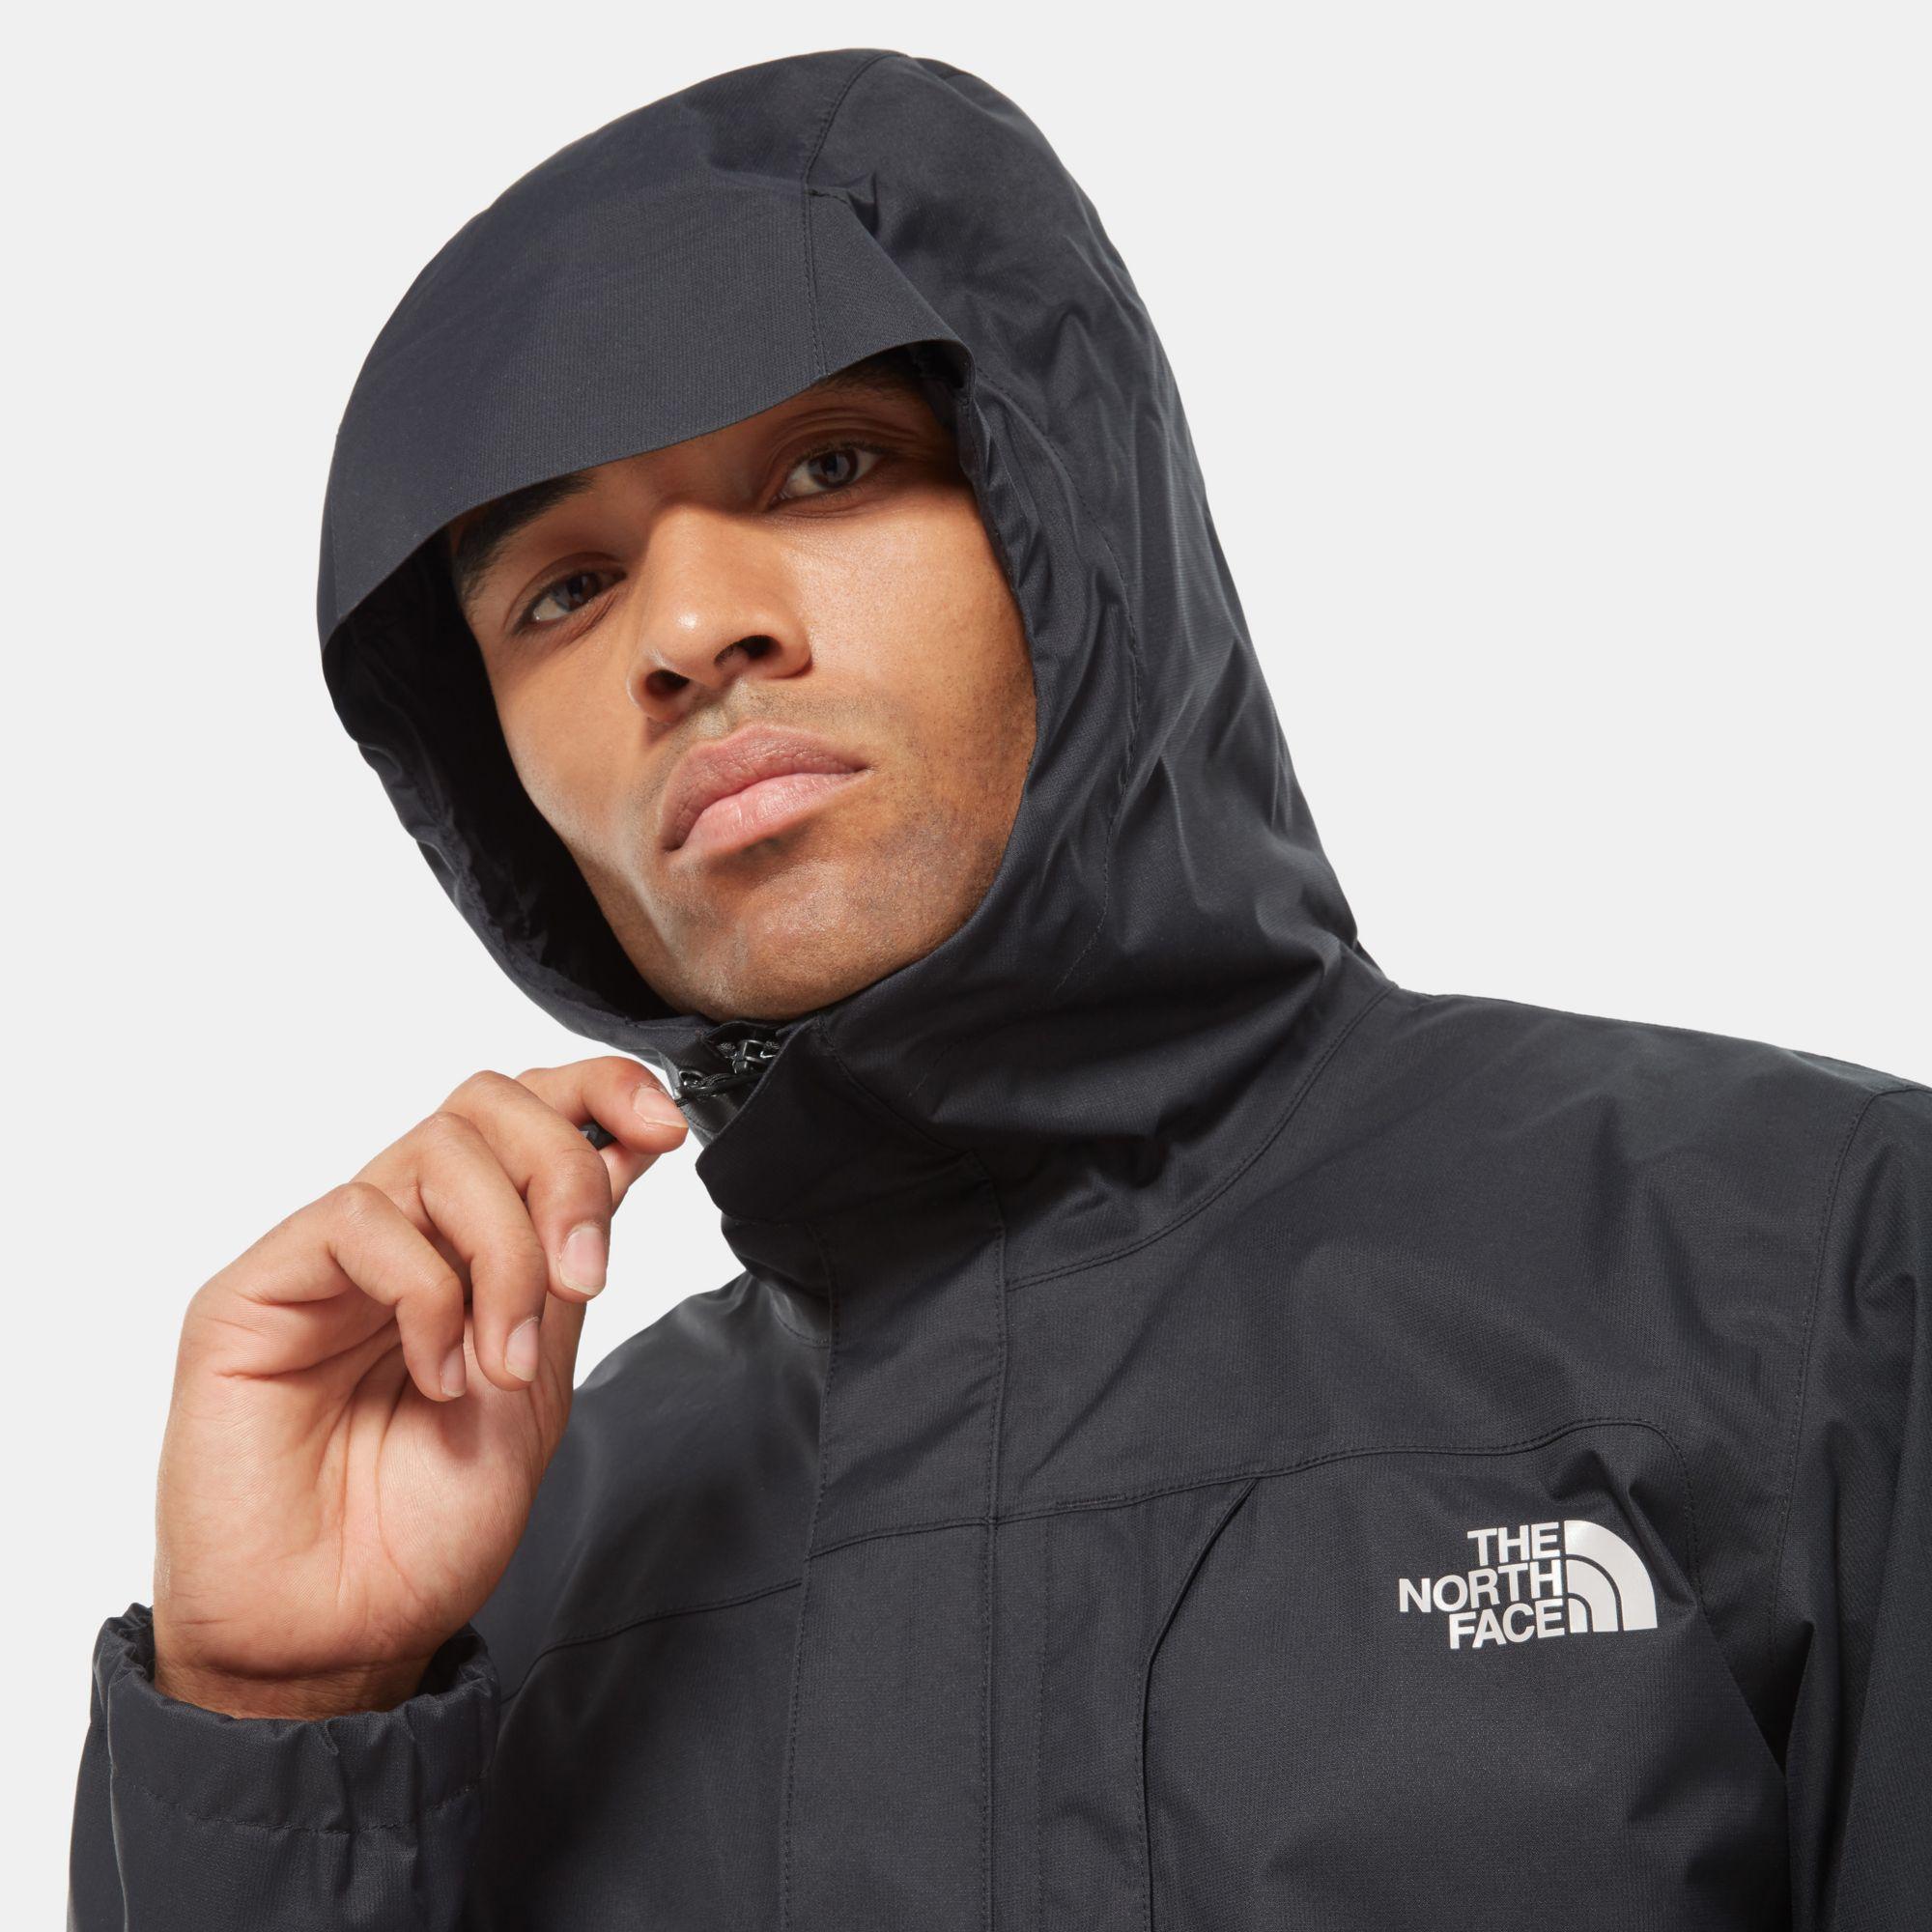 The North Face Synthetic Quest Waterproof Jacket in Black for Men - Save  67% - Lyst